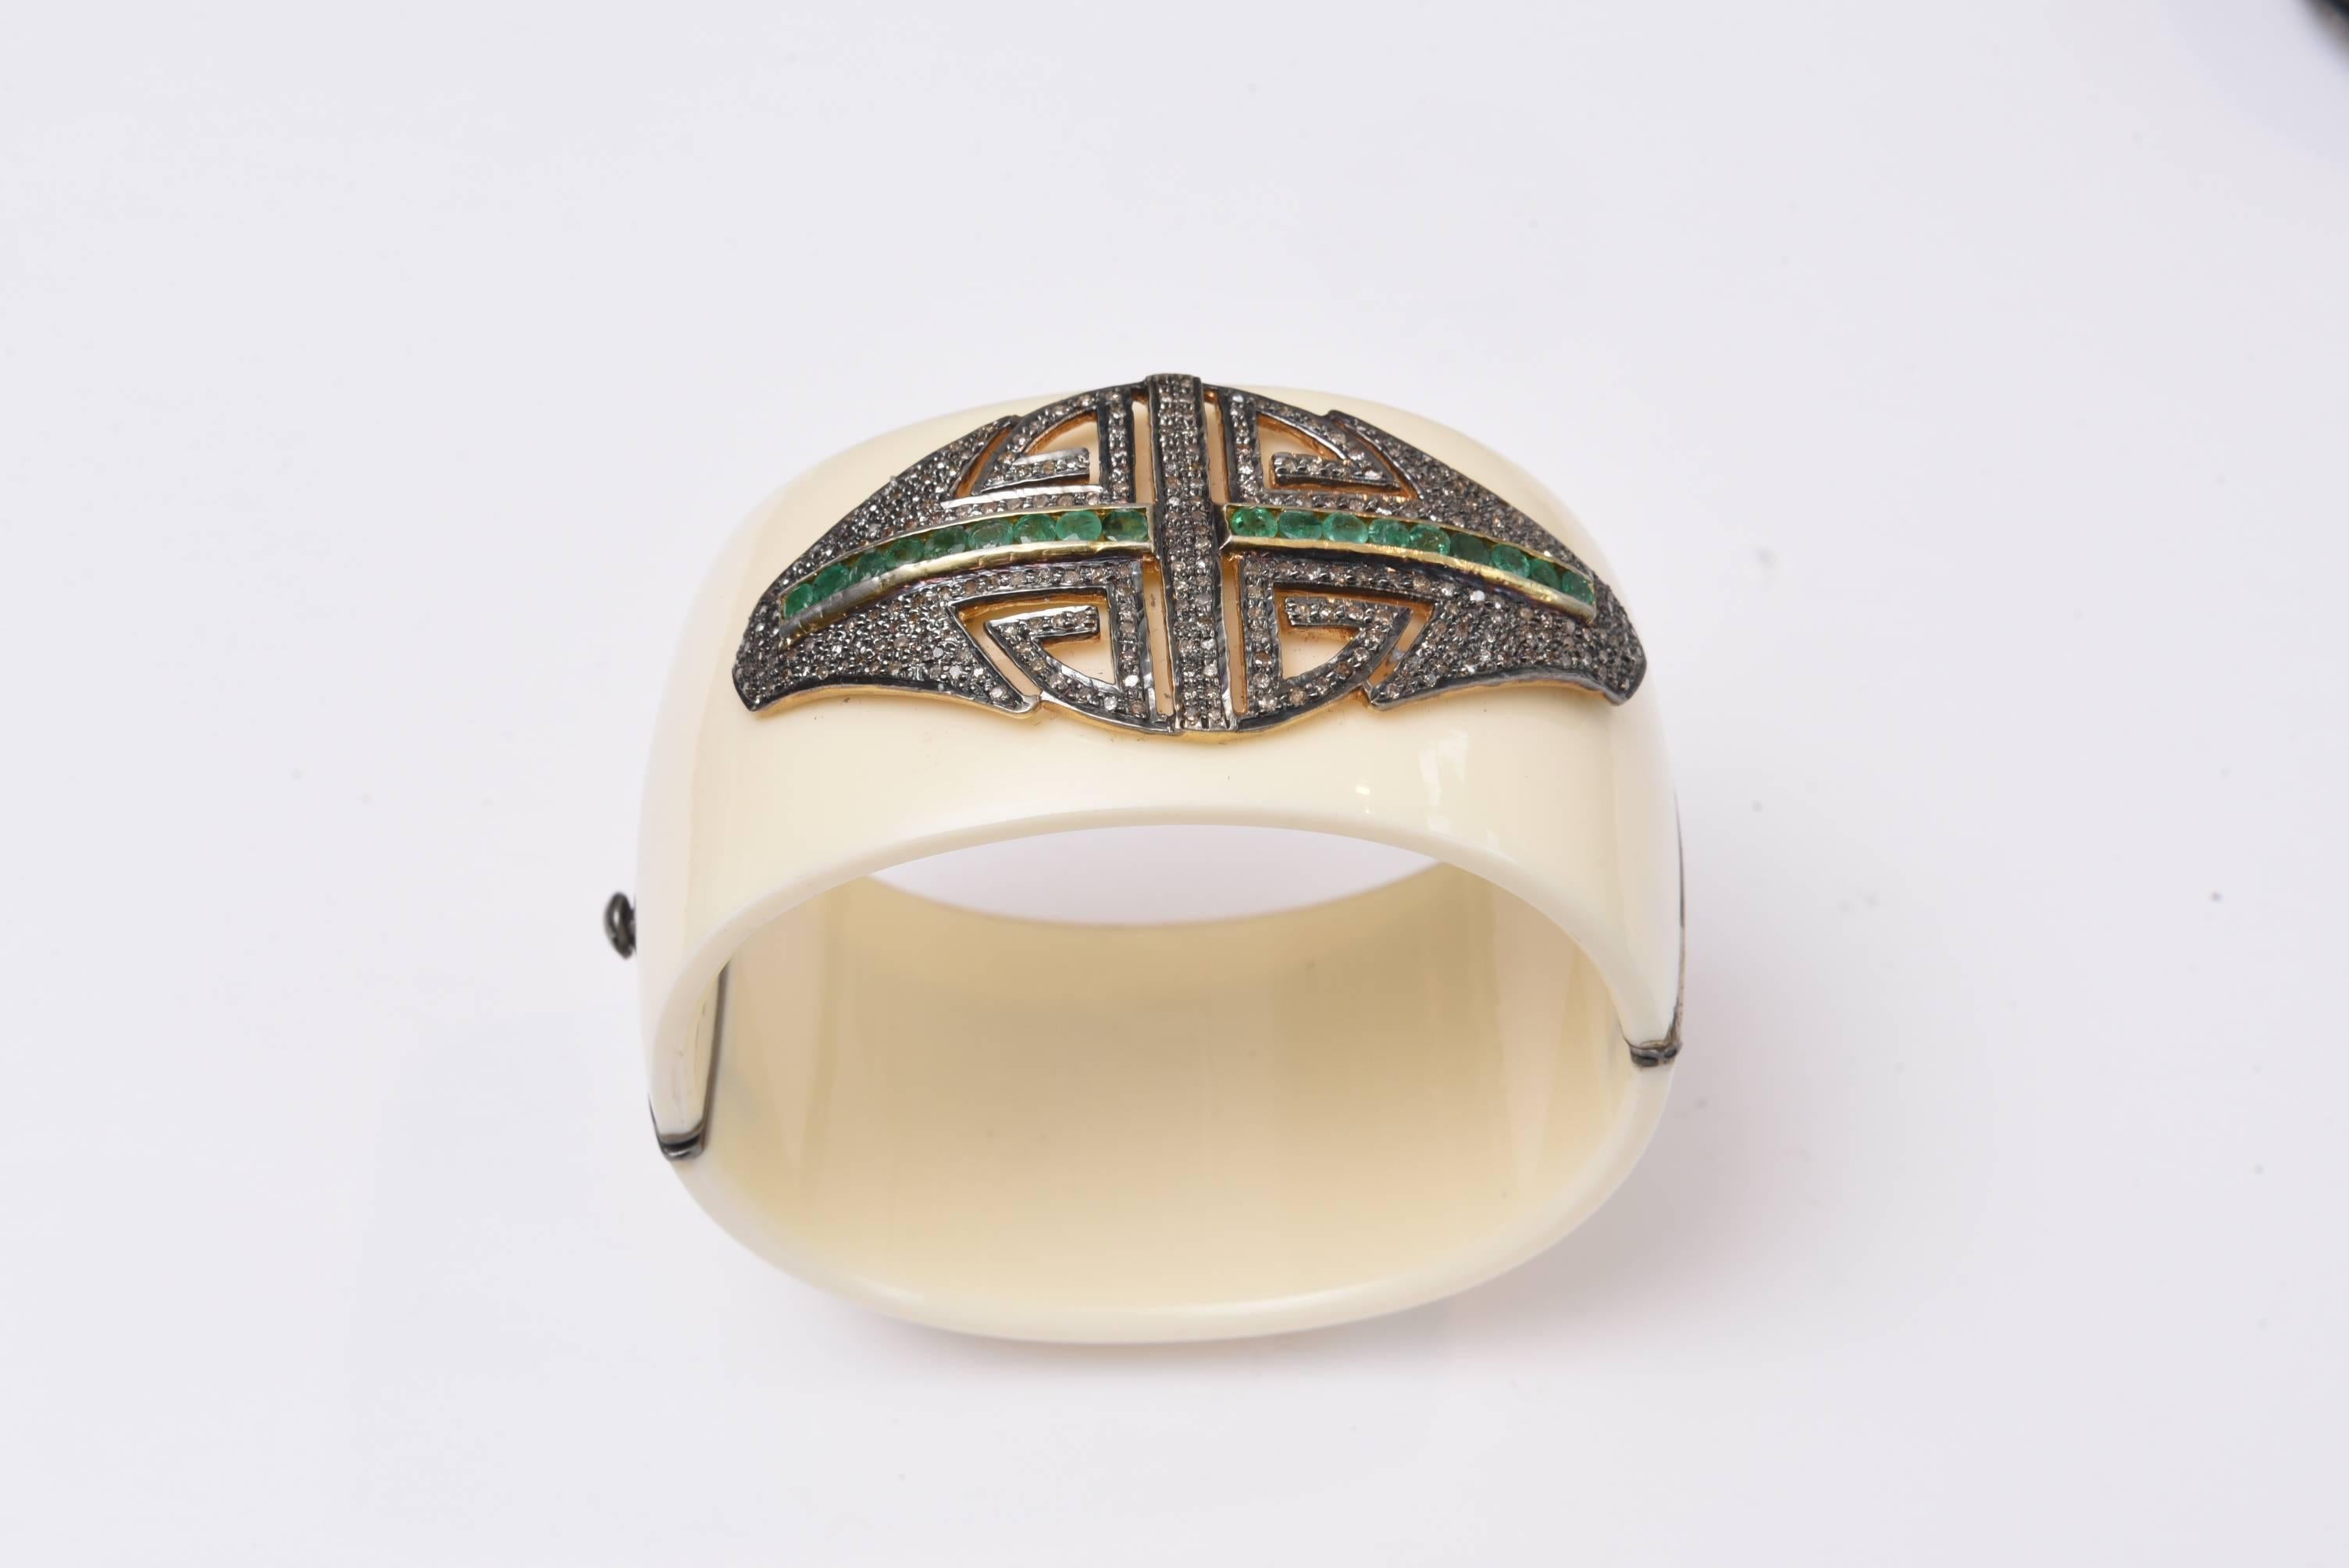 Unusual cuff bracelet of pave`-set diamonds and channel set emeralds in an art deco design in sterling silver affixed to a bakelite cuff.  Hinged for easy on and off and an slightly oval shape to keep the stones on top of the wrist.  Inside